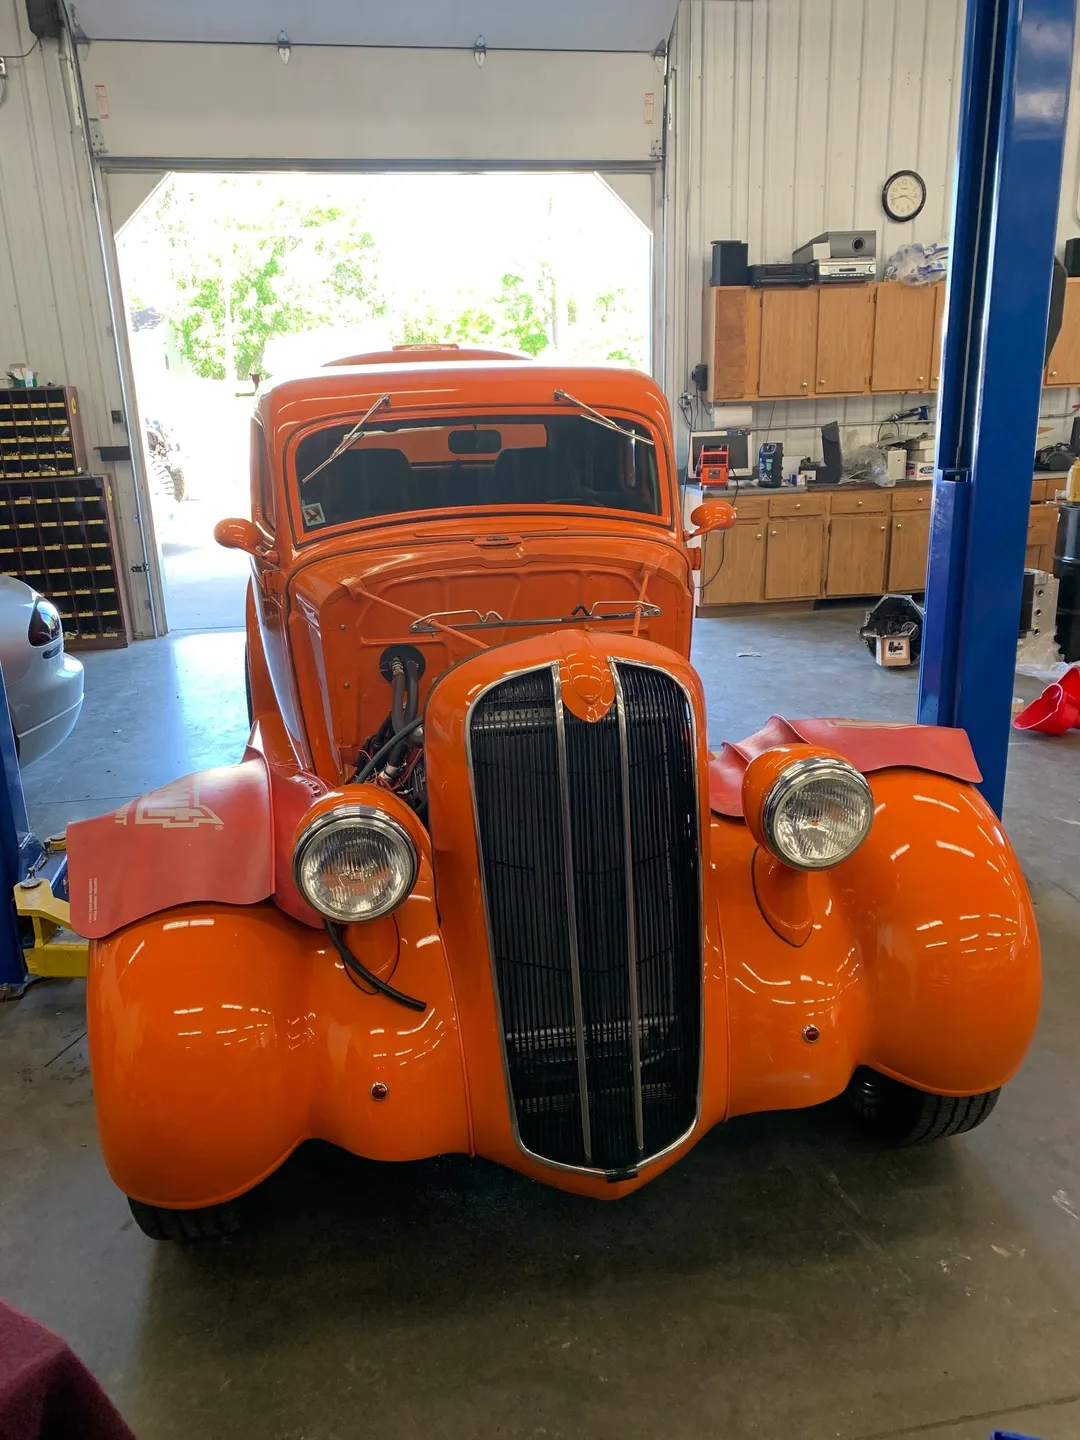 The front view of an orange vintage car